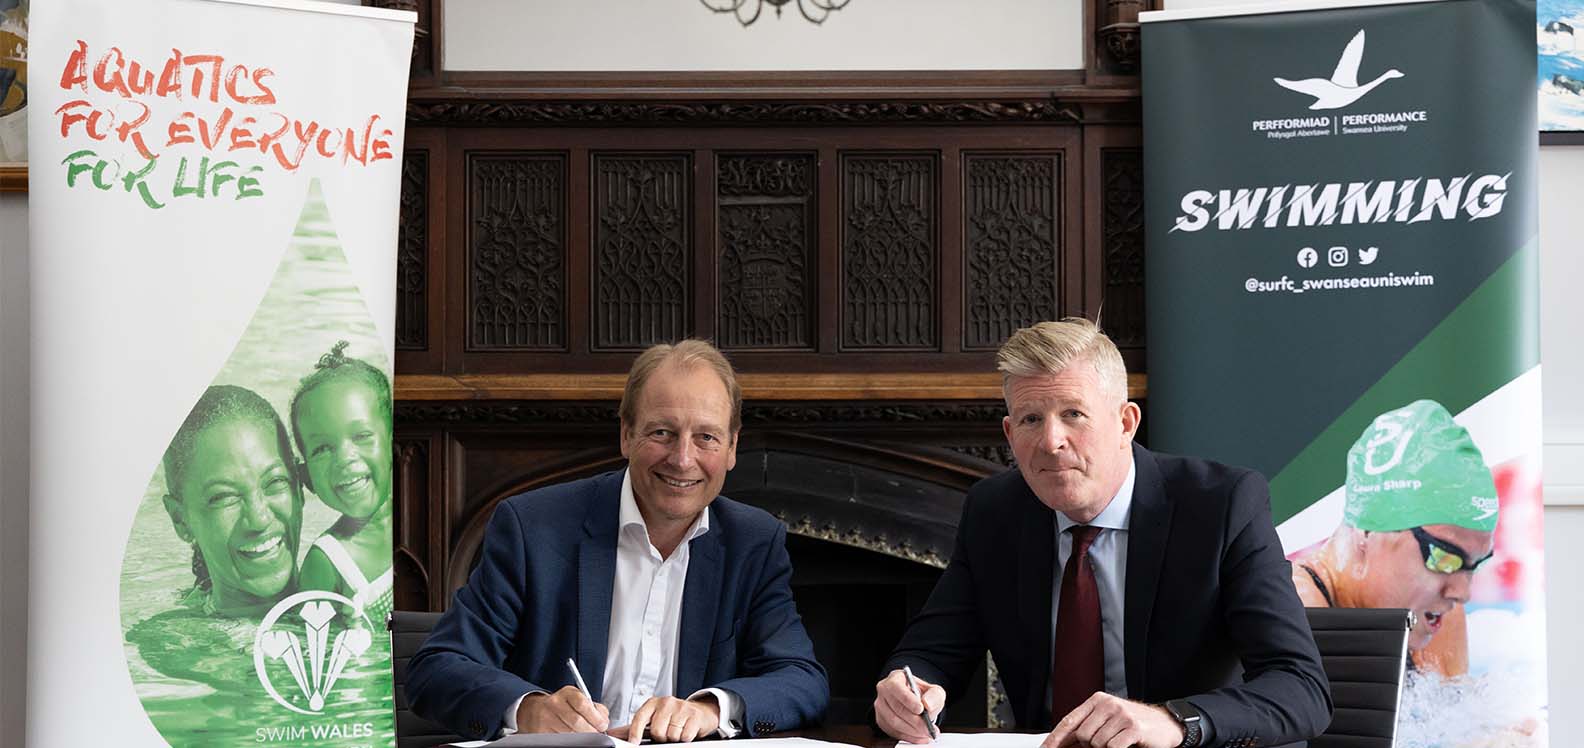 Professor Paul Boyle, Swansea University's Vice-Chancellor and Swim Wales Chief Executive Officer Fergus Feeney signing the partnership agreement